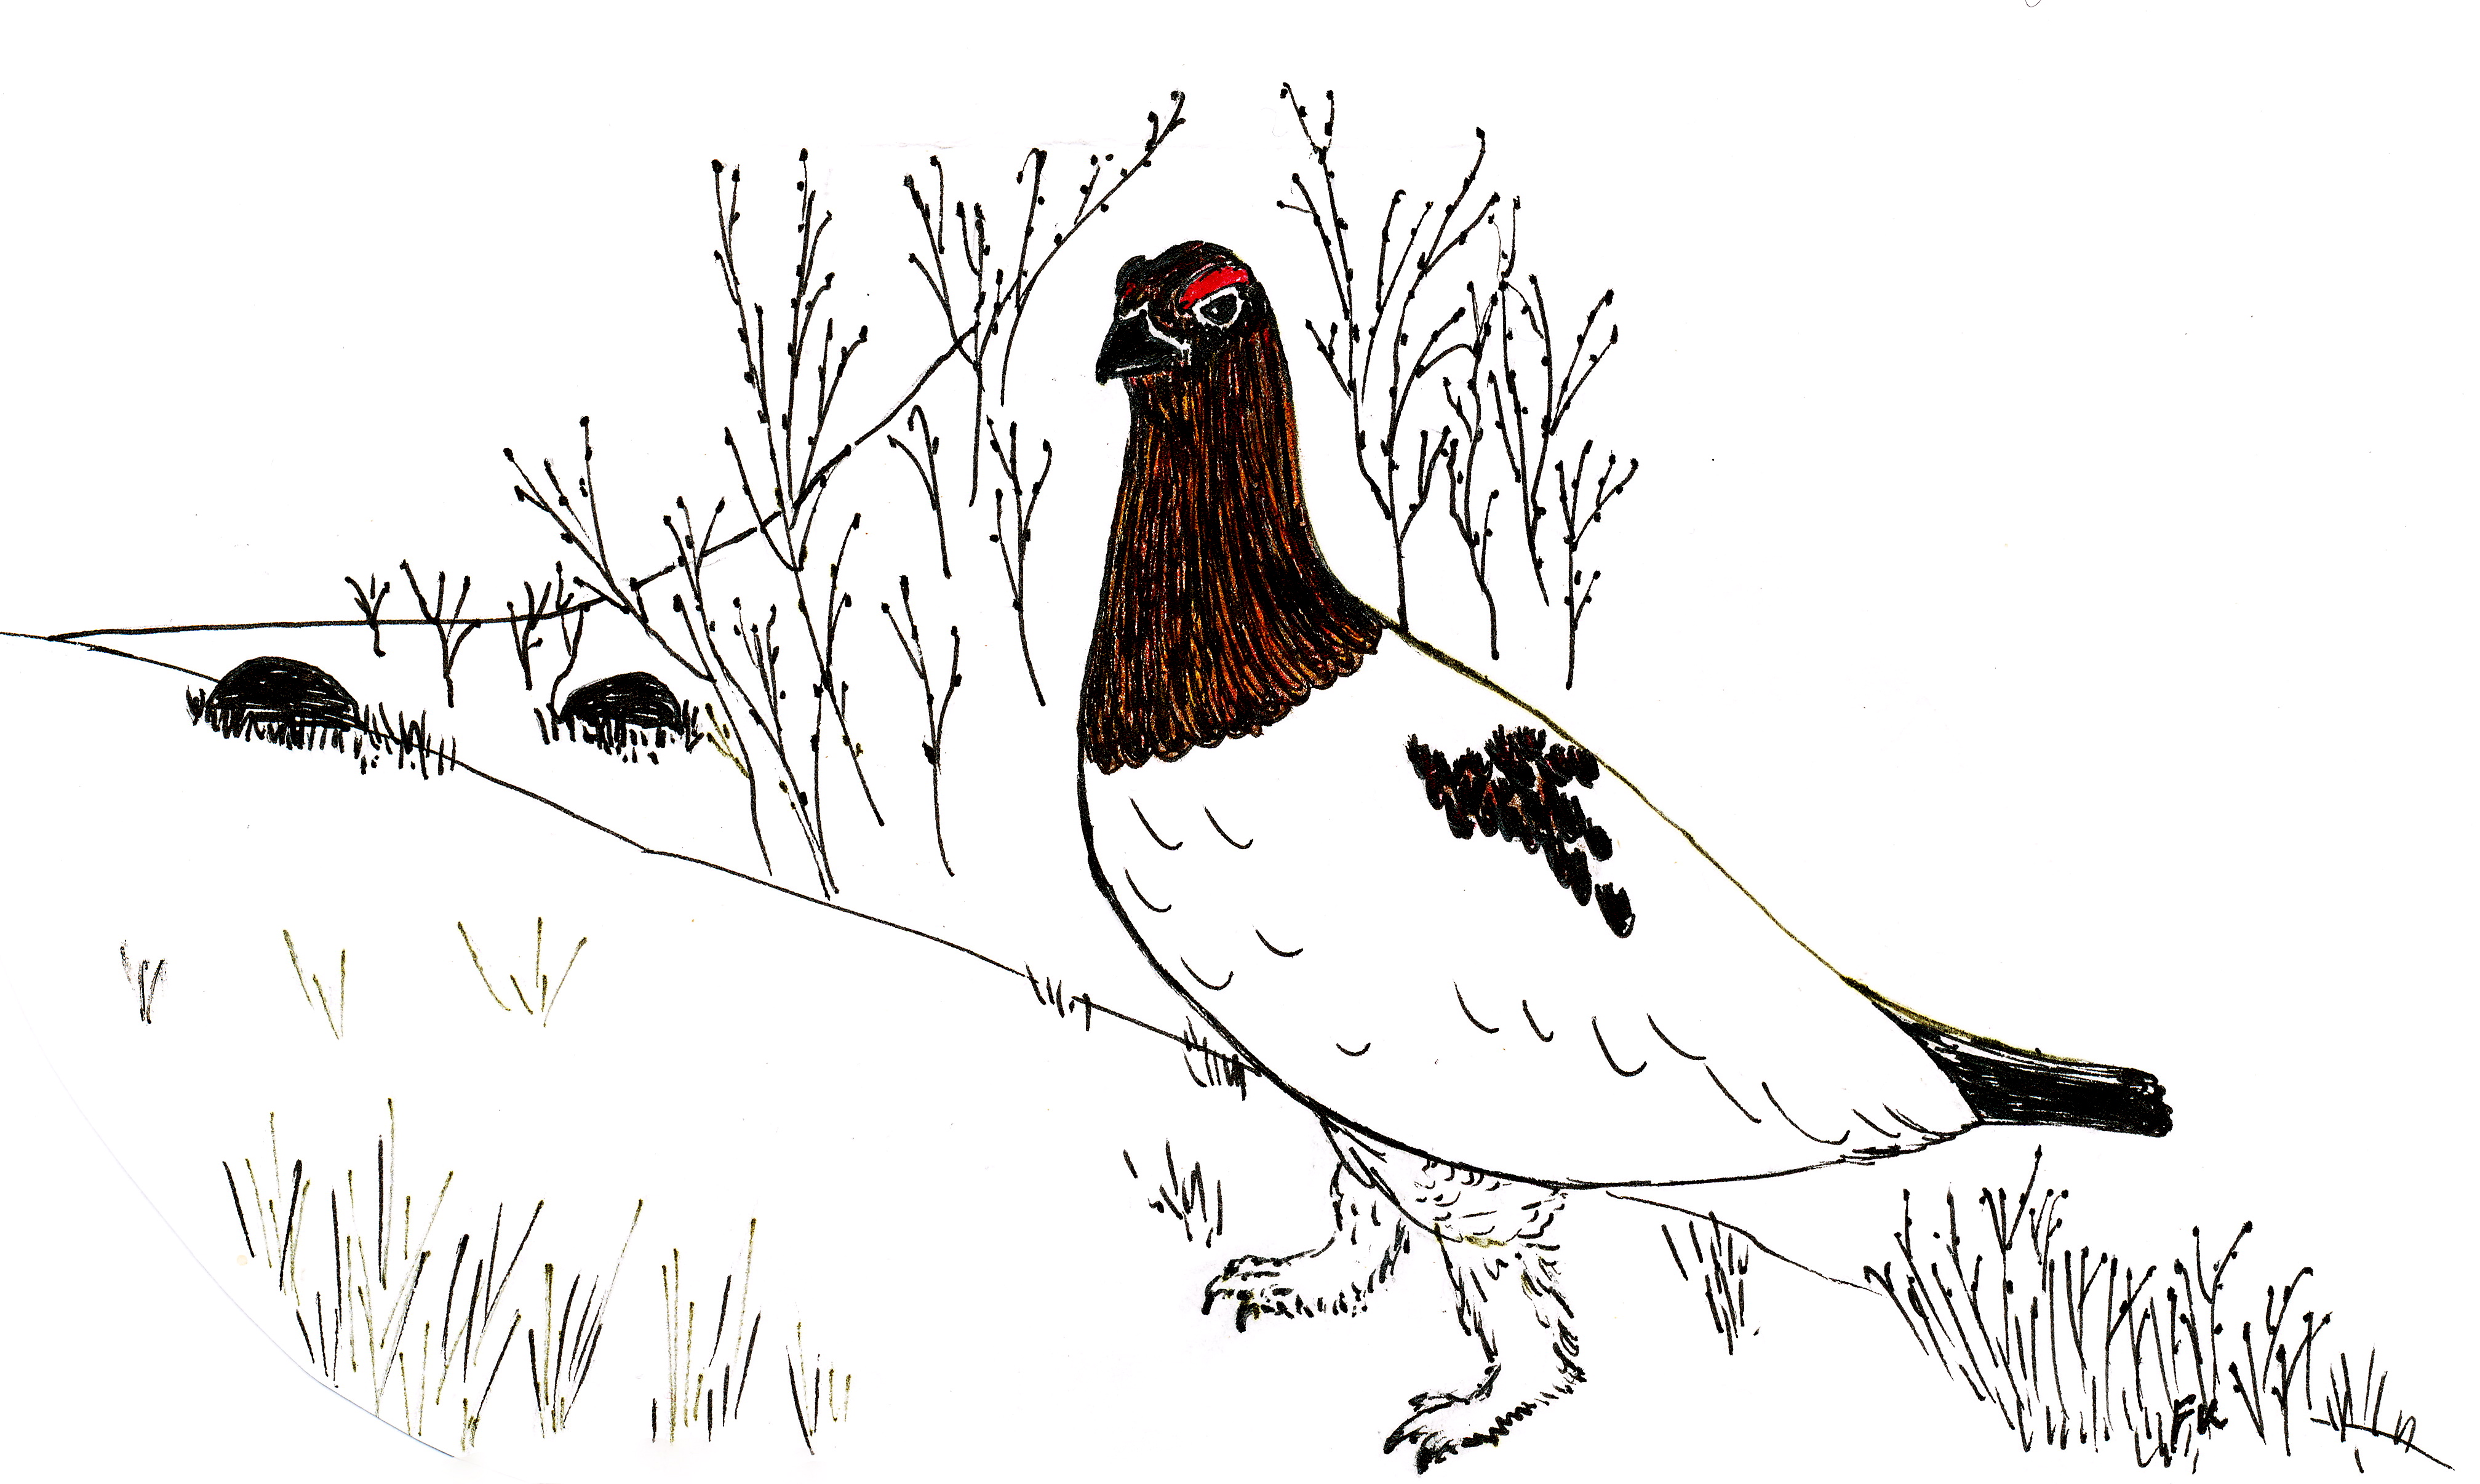 Illustration of a willow ptarmigan standing on the ground